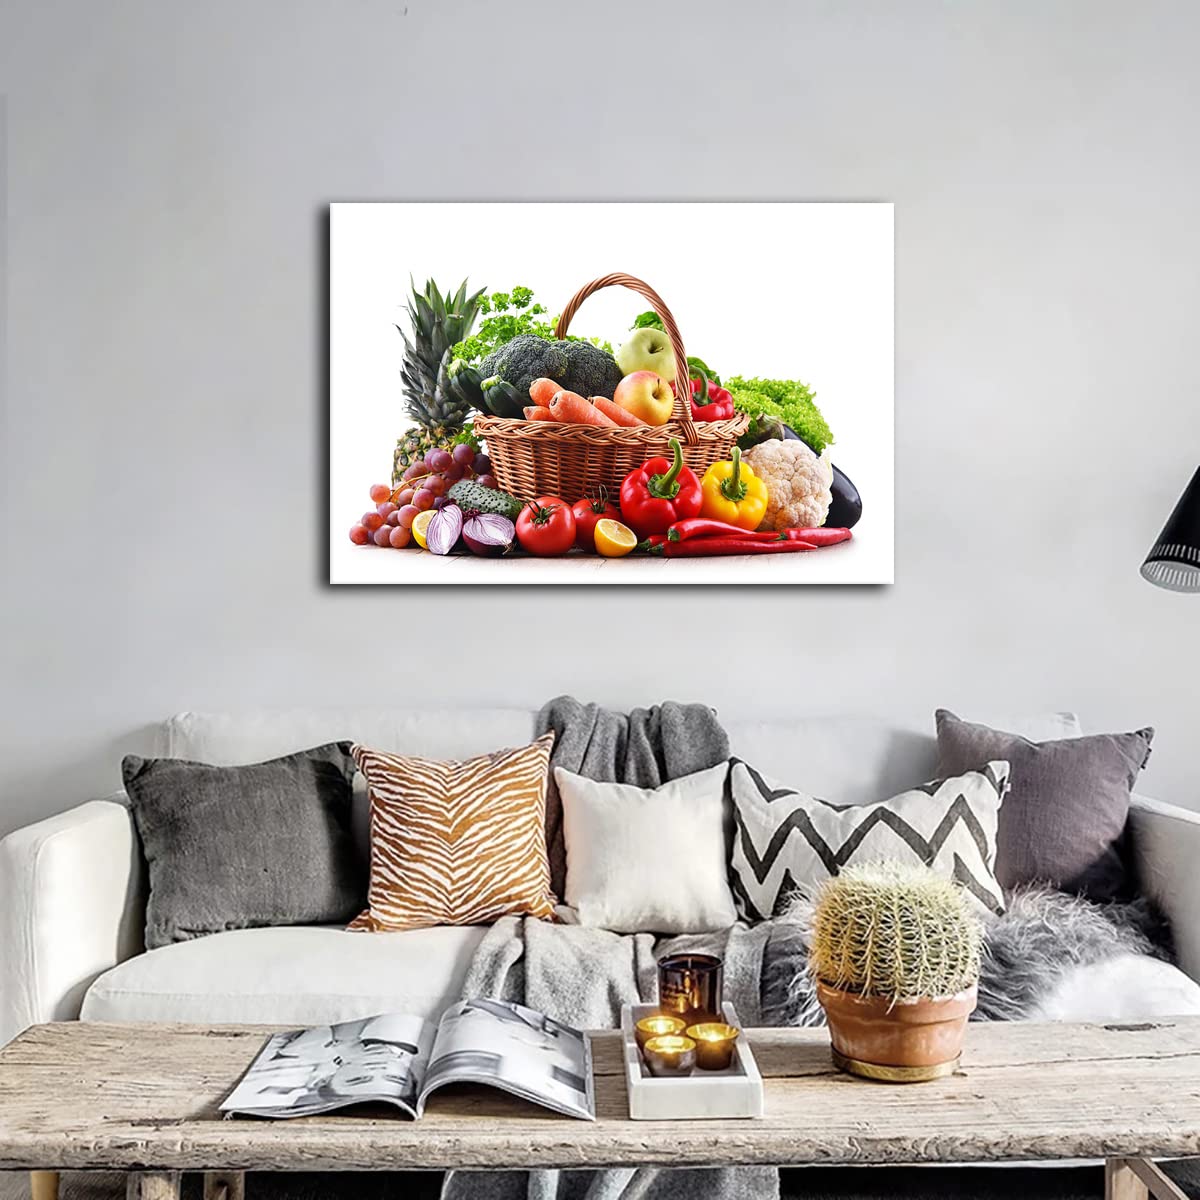 XOPNGRYN Kitchen Theme Vegetables and Fruits Posters and Prints Canvas Paintings Wall Art Picture for Living Room Decor (Unframed-No Framed,8x12inch)